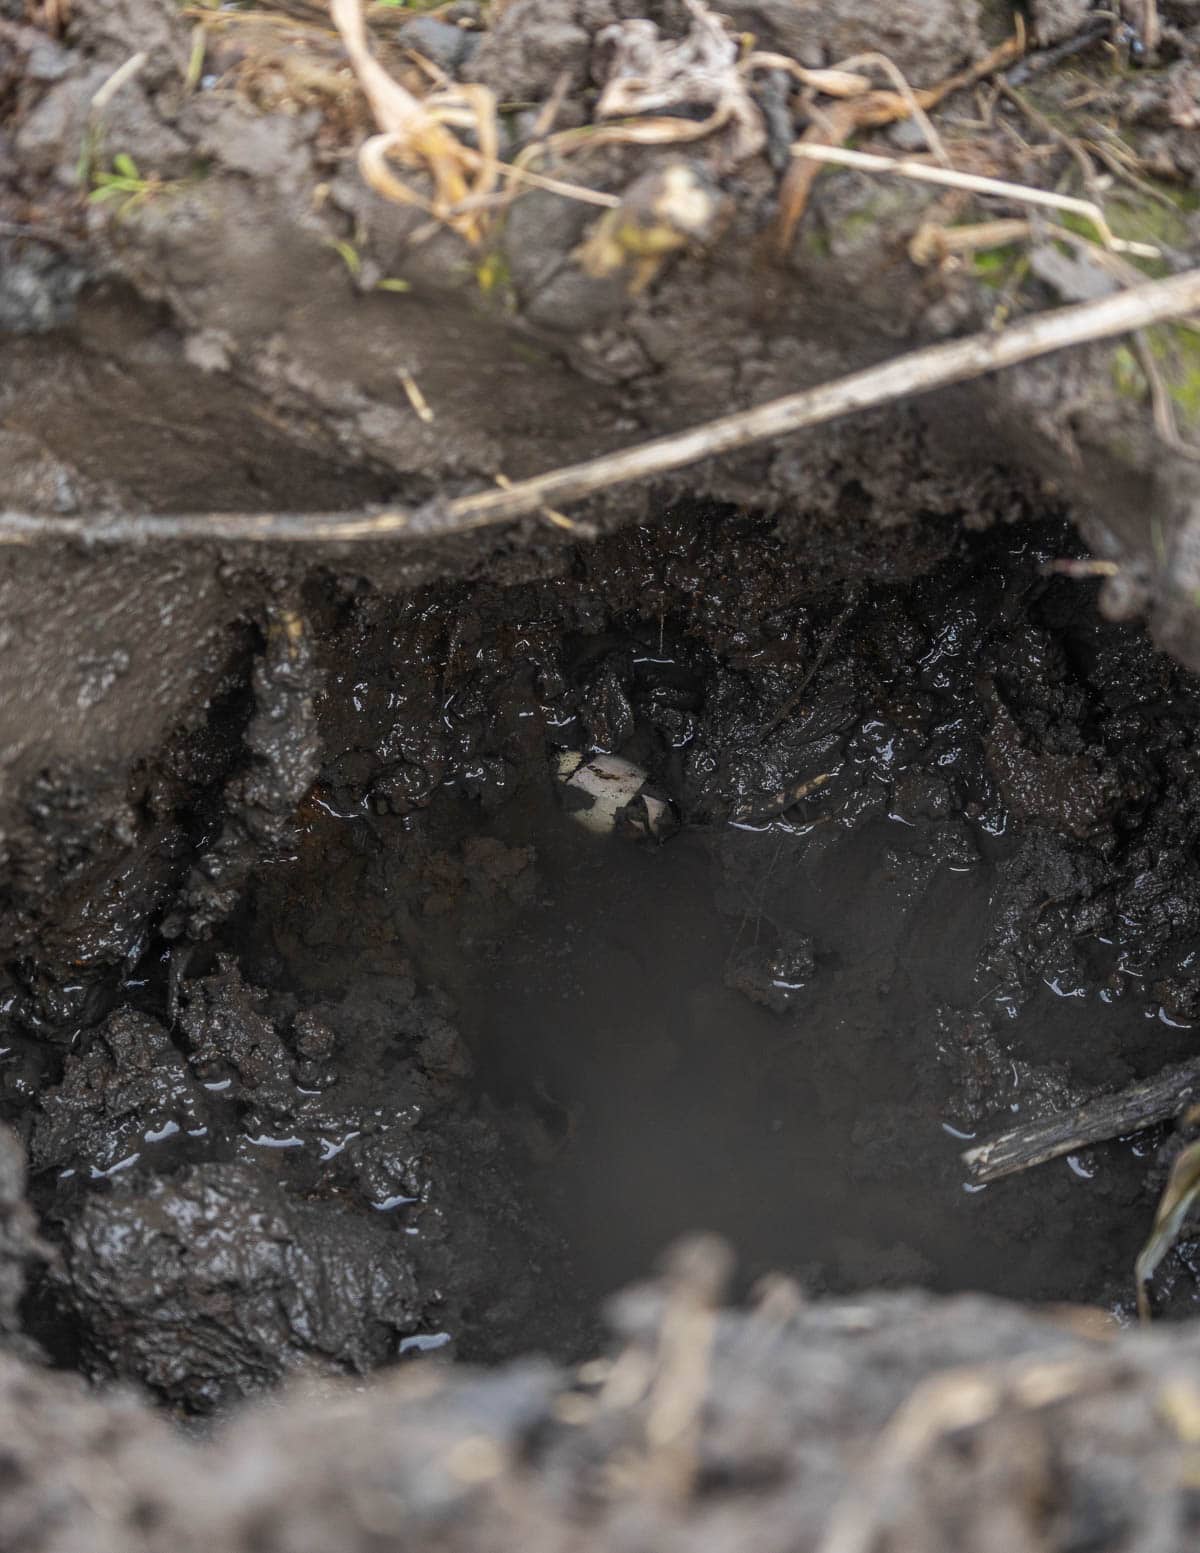 A small wapato potato visible in a hole of clay, mud and water showing the location of the tuber layer for harvesting.